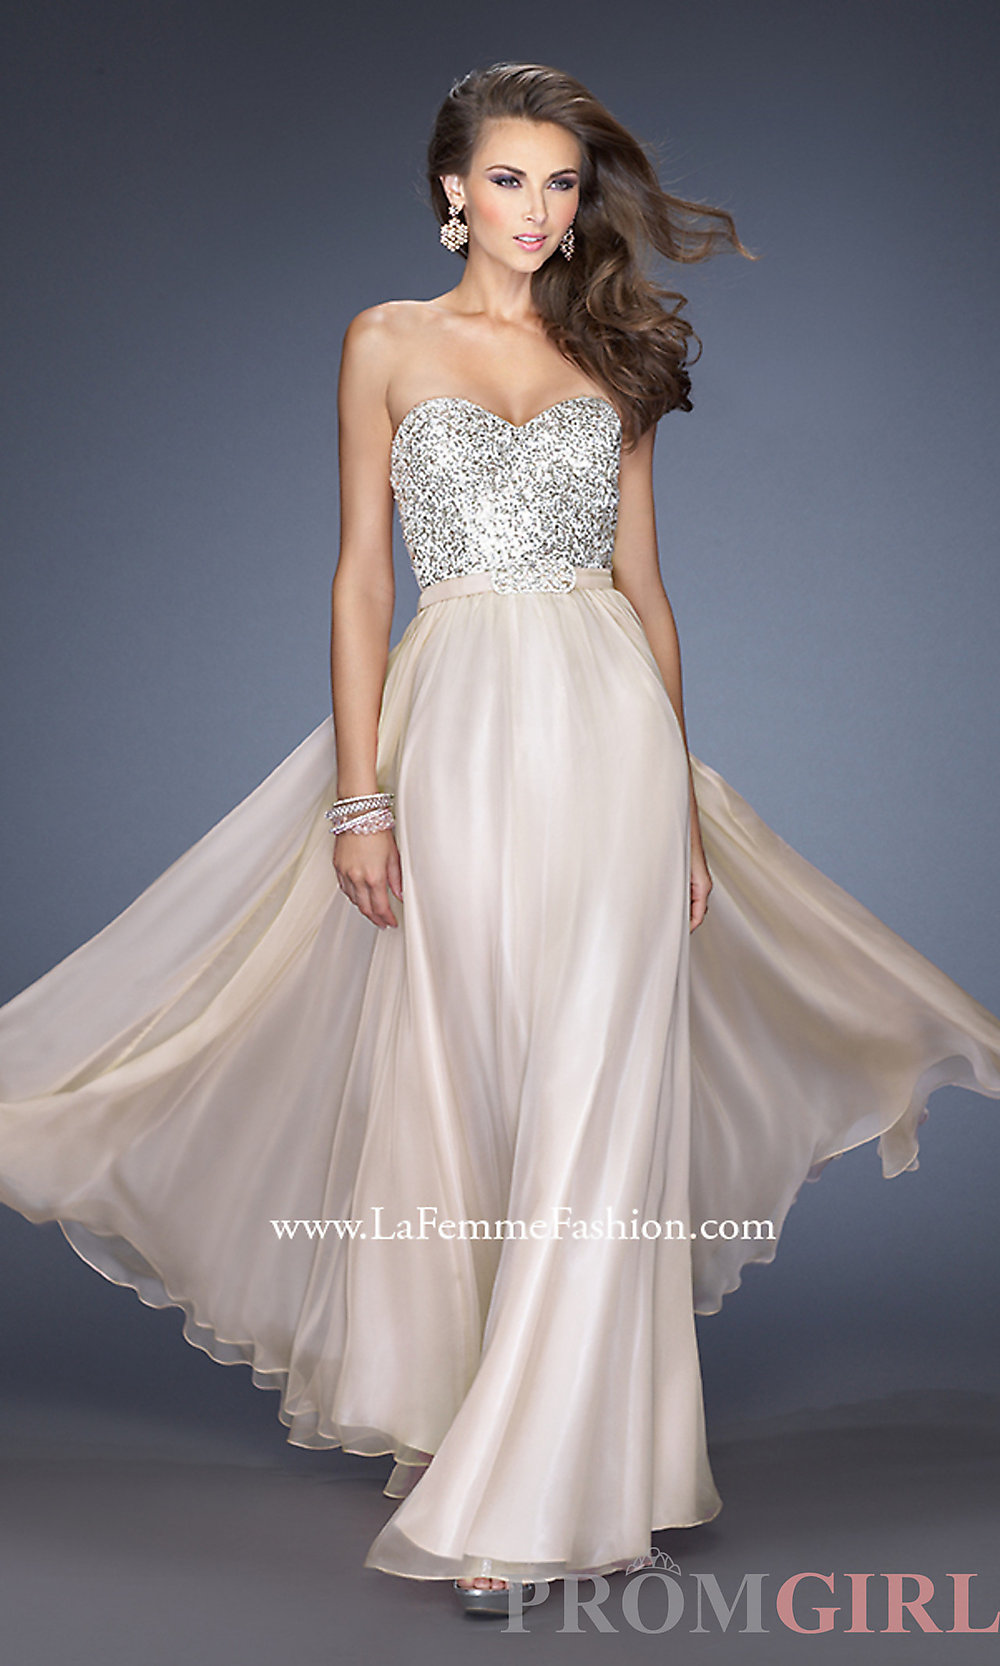 Latest Fancy Gowns, Prom and Cocktail dresses for Weddings and Parties 2014-2015 (12)